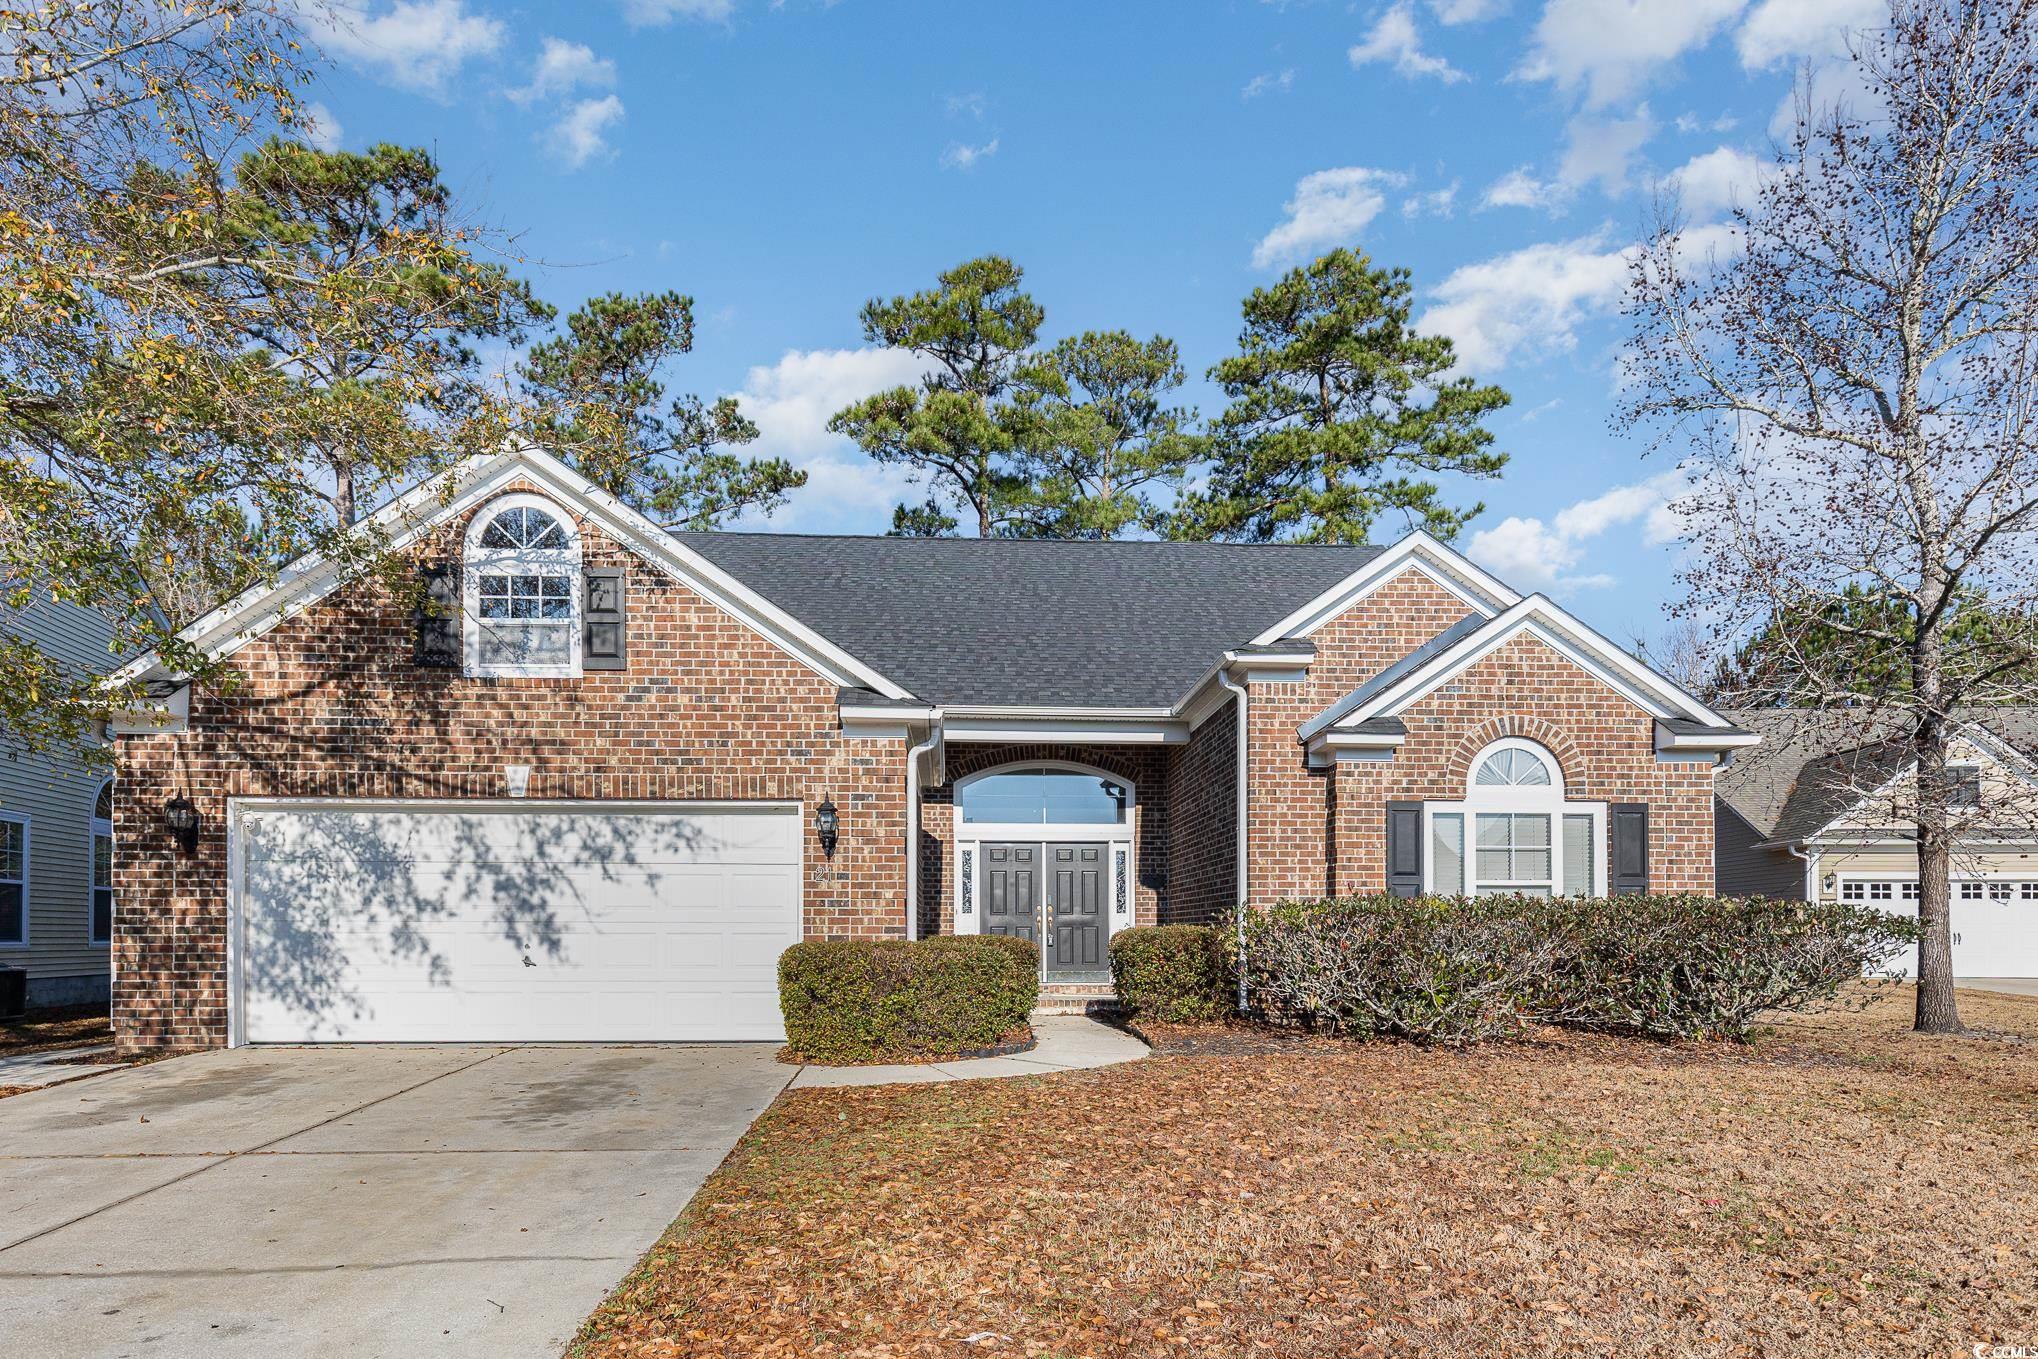 located in the prestigious prince creek - linksbrook community of murrells inlet, sc, this home offers a blend of luxury and comfort across its 2520 heated sq ft. this 4-bedroom, 2-bathroom property features a spacious kitchen with a standalone island, a cozy fireplace for relaxing evenings, and a carolina room filled with natural light, perfect for unwinding or entertaining. the roof was replaced in 2023, offering a unique opportunity for its new owner to infuse it with their style, ensuring a blend of comfort and customization.  residents of this community enjoy access to top-notch amenities, including tennis/pickleball courts, a zero-entry swimming pool, and a clubhouse, enhancing the living experience. the location is unbeatable, minutes away from the murrells inlet marsh walk known for its seafood restaurants and vibrant atmosphere, huntington beach state park, brookgreen gardens, and essential shopping and medical facilities.  21 long creek dr is more than just a home; it's a gateway to a lifestyle of convenience, luxury, and community in one of south carolina's most sought-after areas. don't miss the opportunity to make this your new address and enjoy everything murrells inlet has to offer.